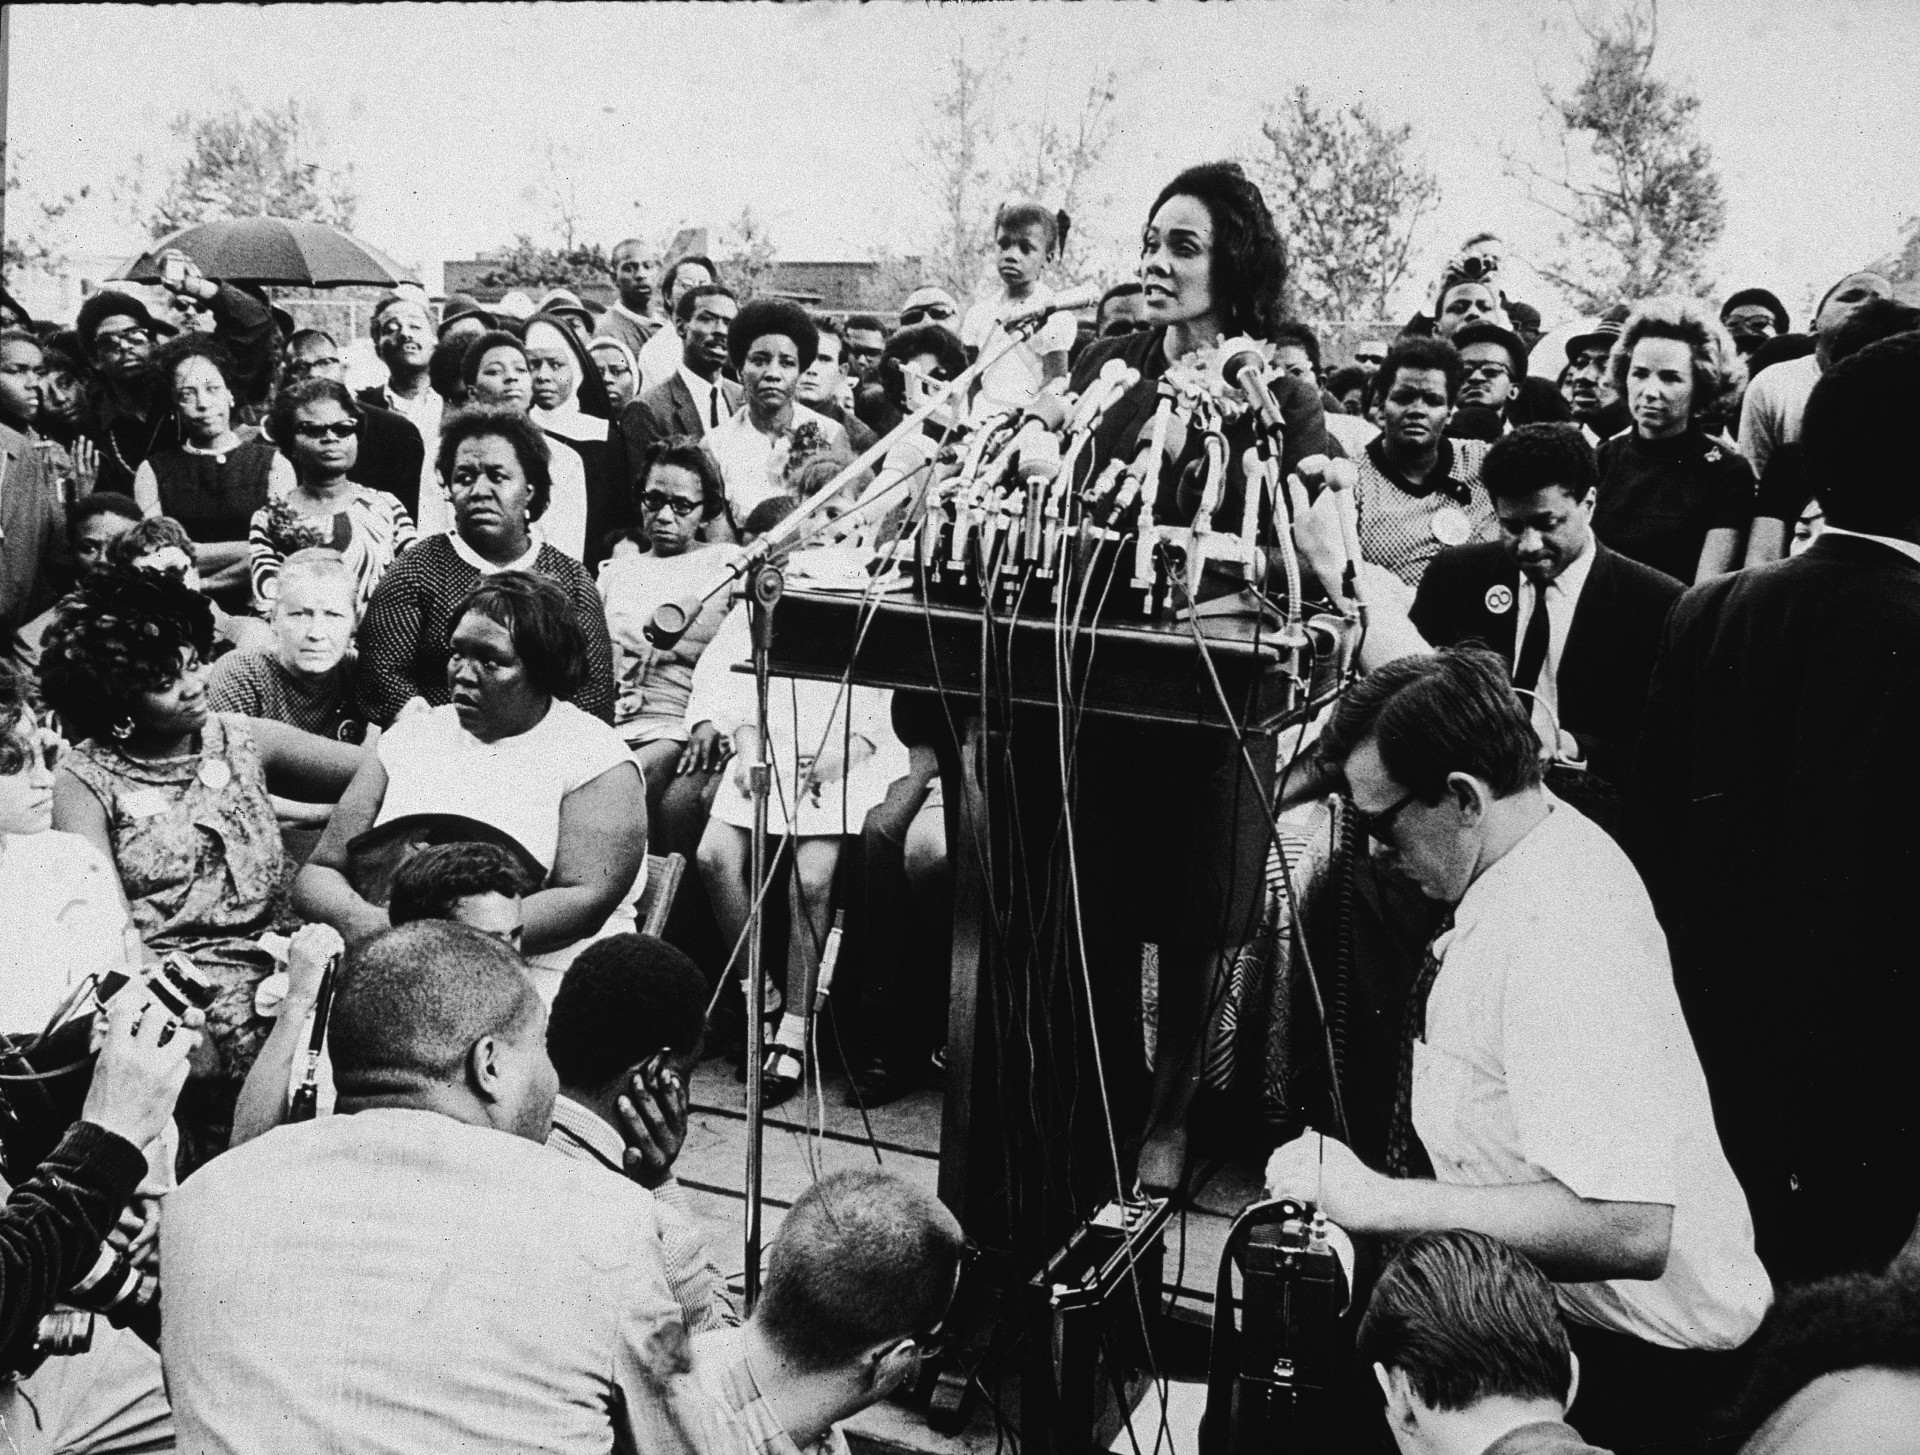 After her husband's death, Coretta Scott King established her own distinguished career as an civil rights activist.<p>You may also like:<a href="https://www.starsinsider.com/n/341685?utm_source=msn.com&utm_medium=display&utm_campaign=referral_description&utm_content=347864v15en-us"> What would happen if we didn't have the moon?</a></p>